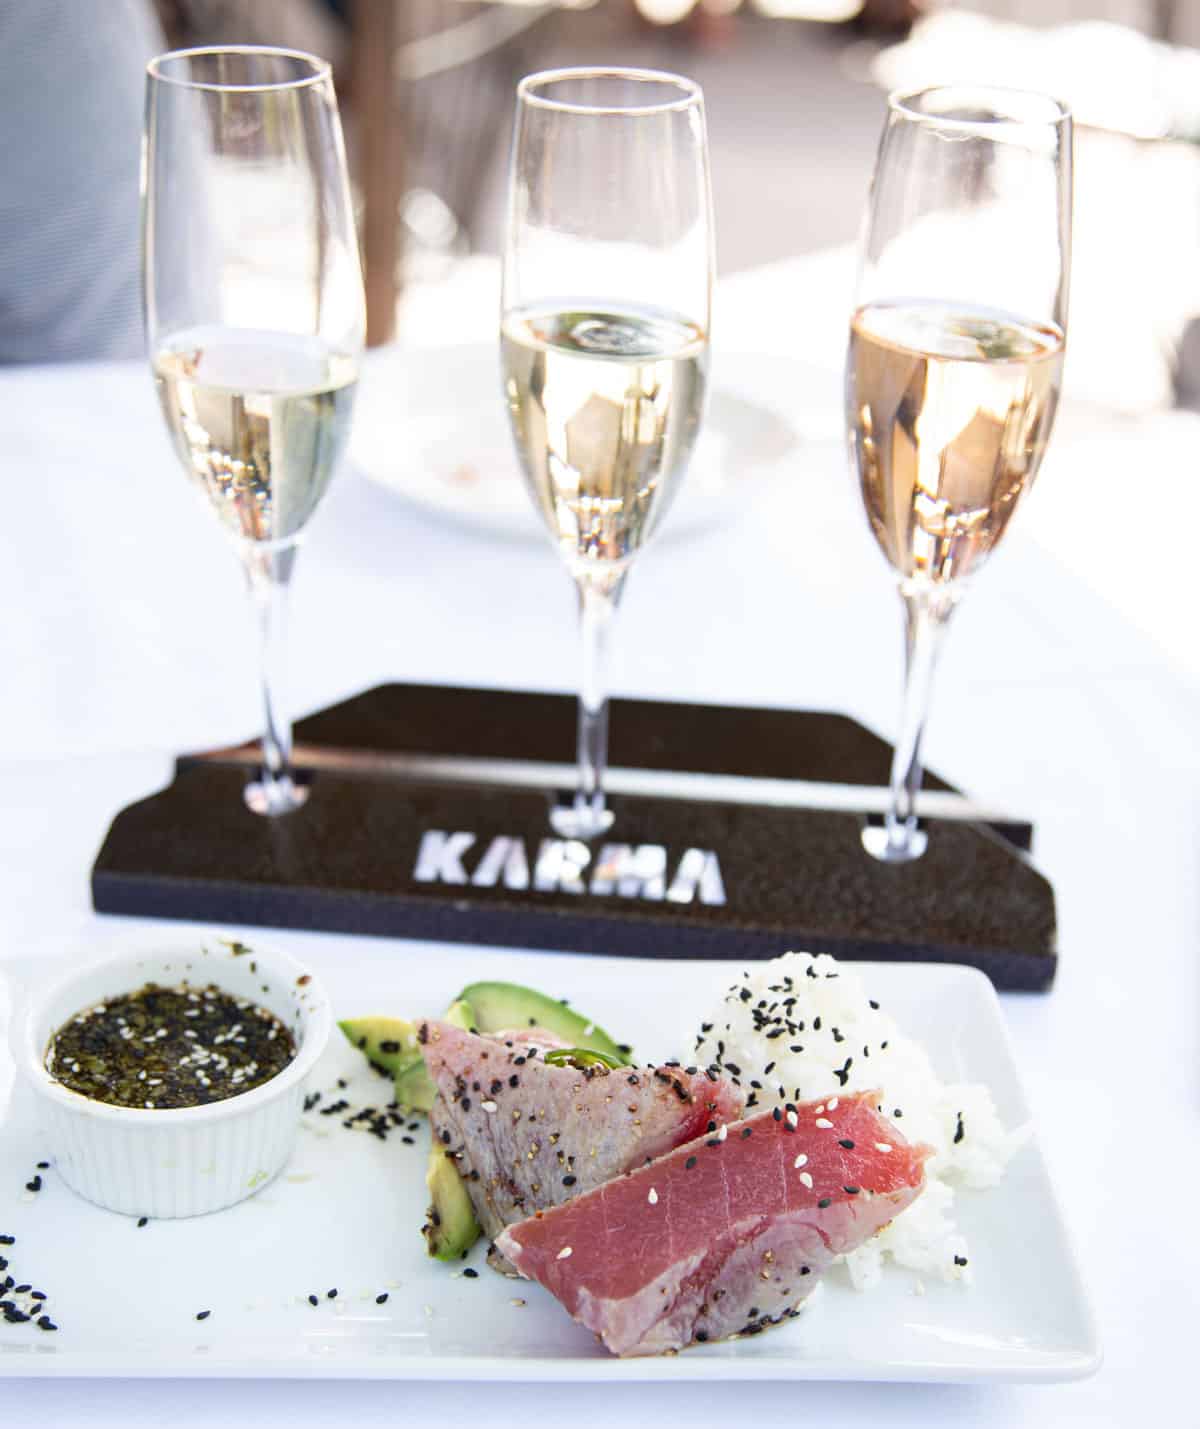 A flight of sparkling wine from Karma Vineyards